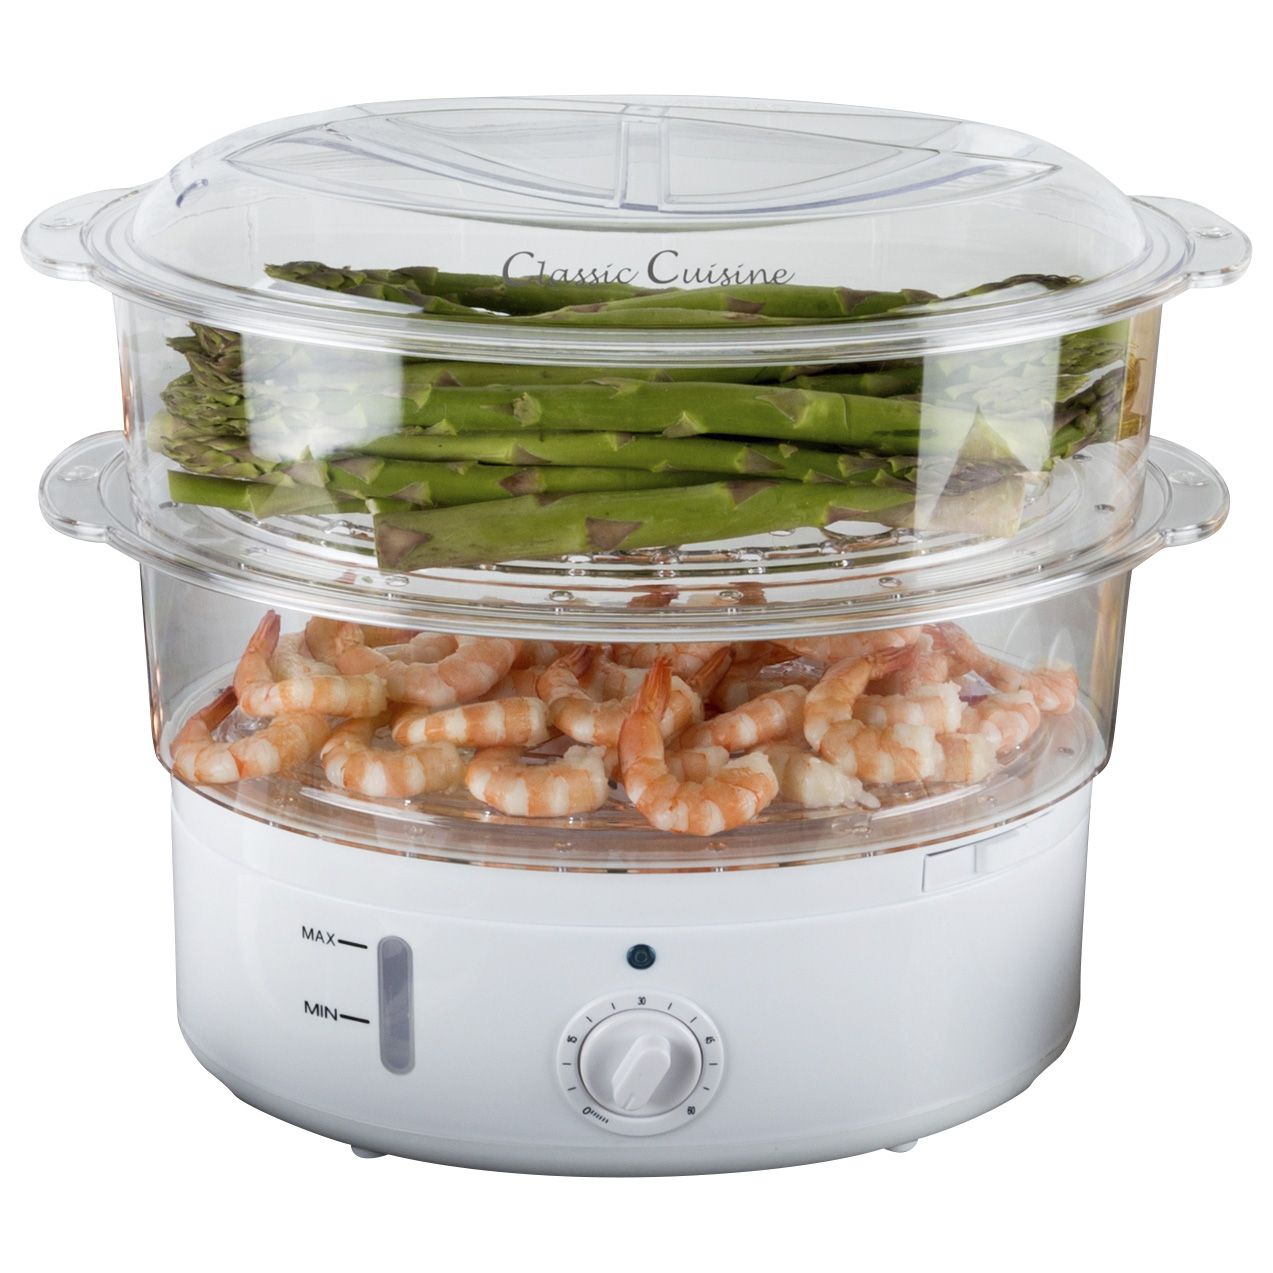 Vegetable Steamer and Rice Cooker - 6.3 Quart Electric Steamer by